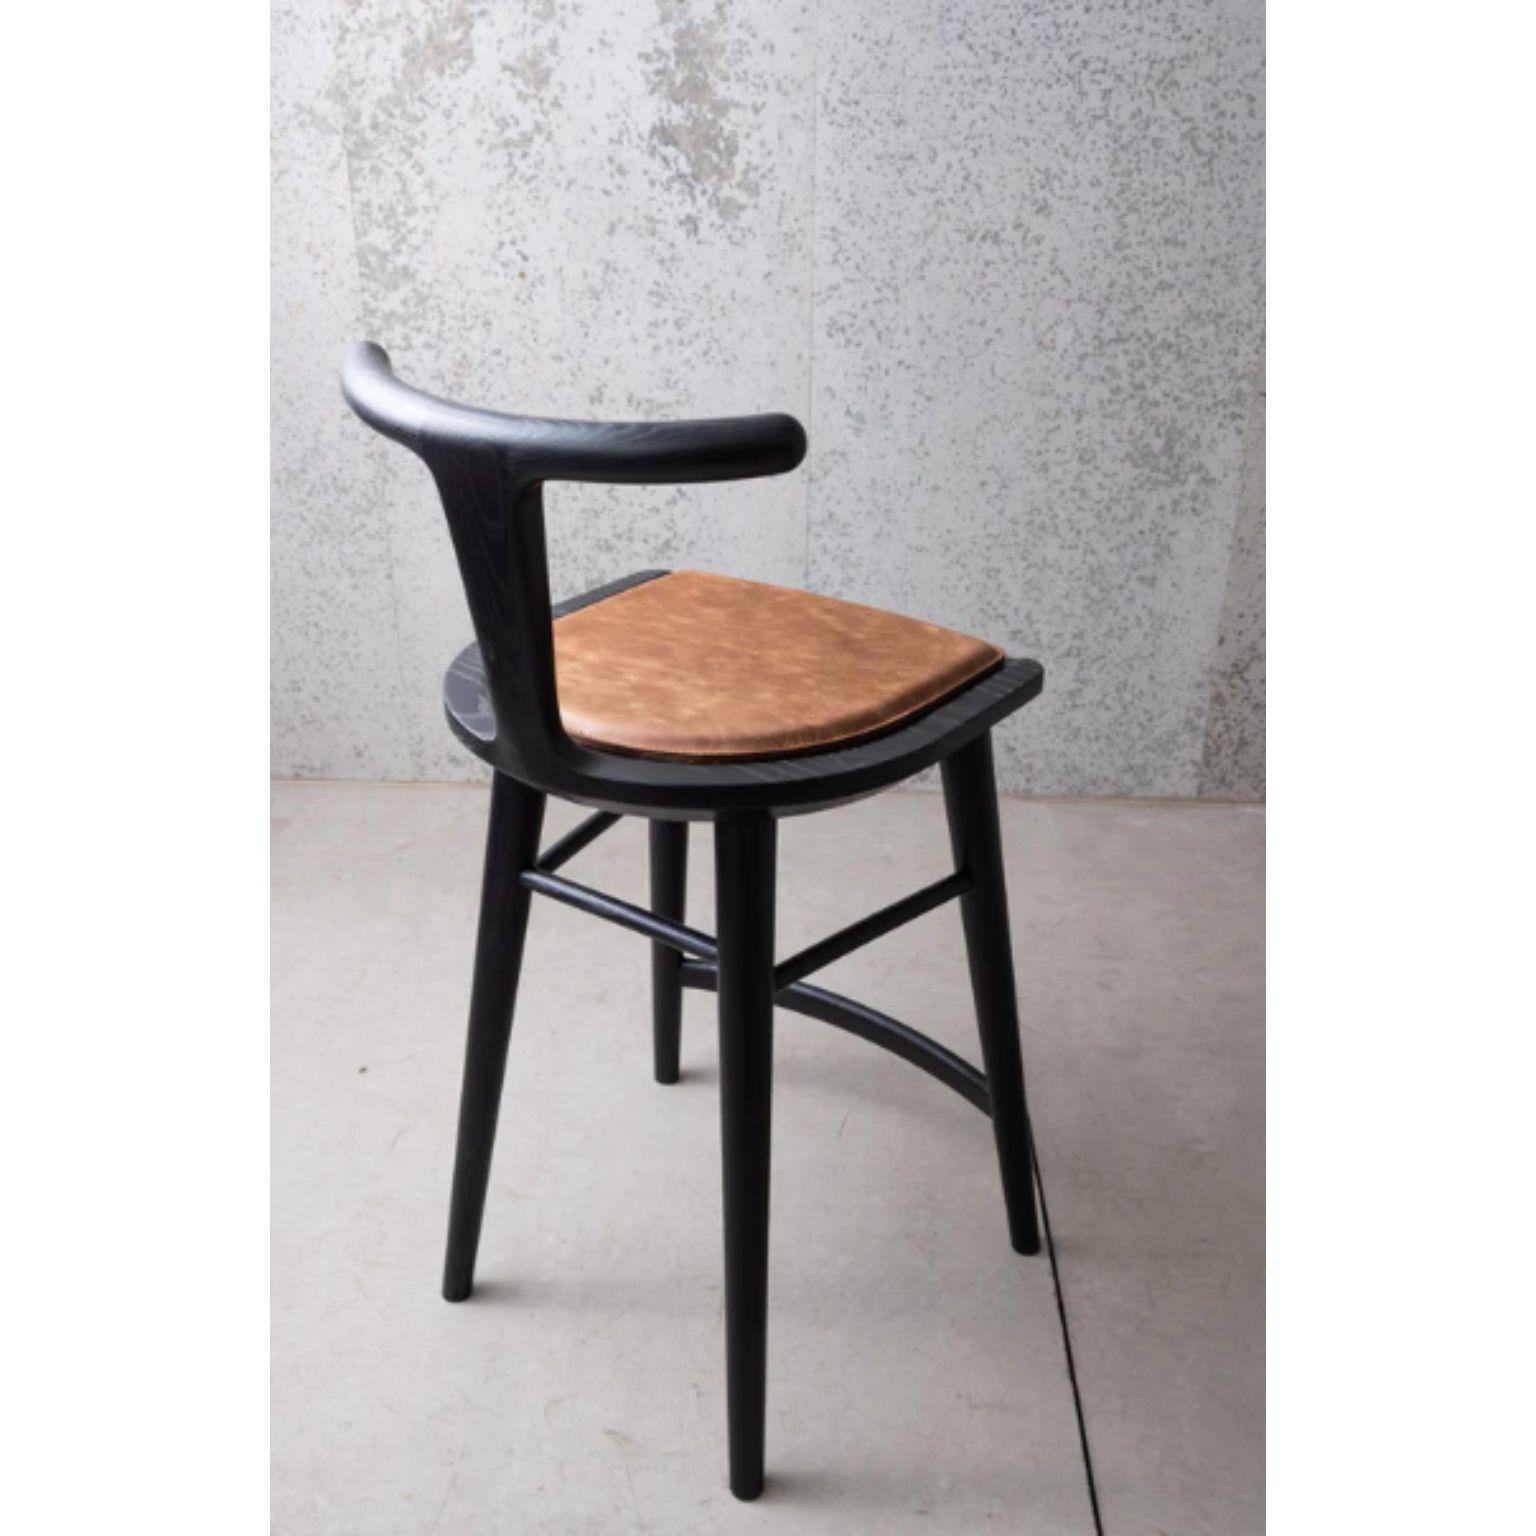 Other Charcoal Ash Oxbend Stool with Leather Seat Pad by Fernweh Woodworking